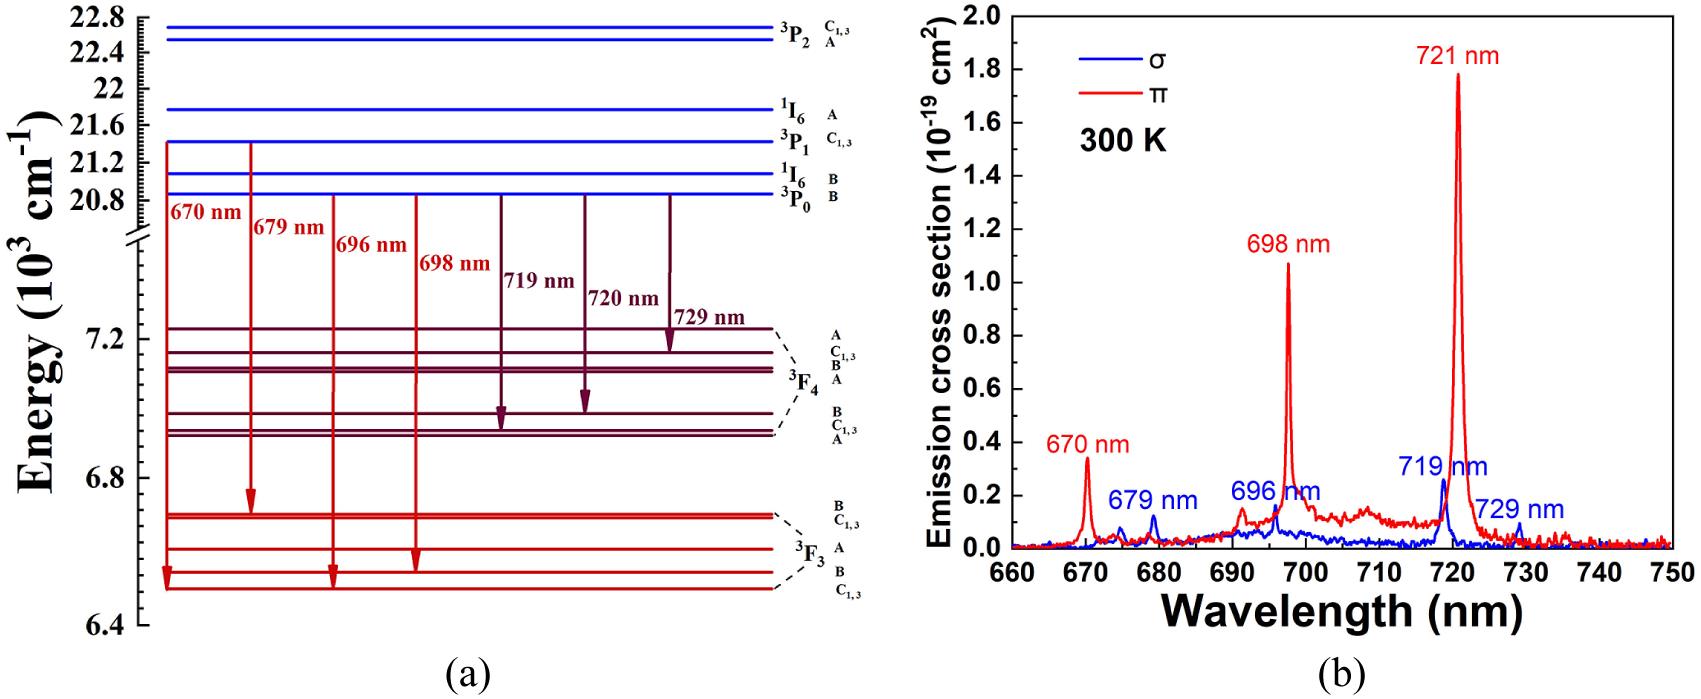 Some spectroscopy properties of the Pr3+:YLF crystal. (a) Major deep red laser transitions of the Pr3+:YLF crystal from 3P0,1,2 to 3F4, 3F3[38" target="_self" style="display: inline;">38]. (b) Emission cross-sections of the Pr3+:YLF crystal in the deep red region.